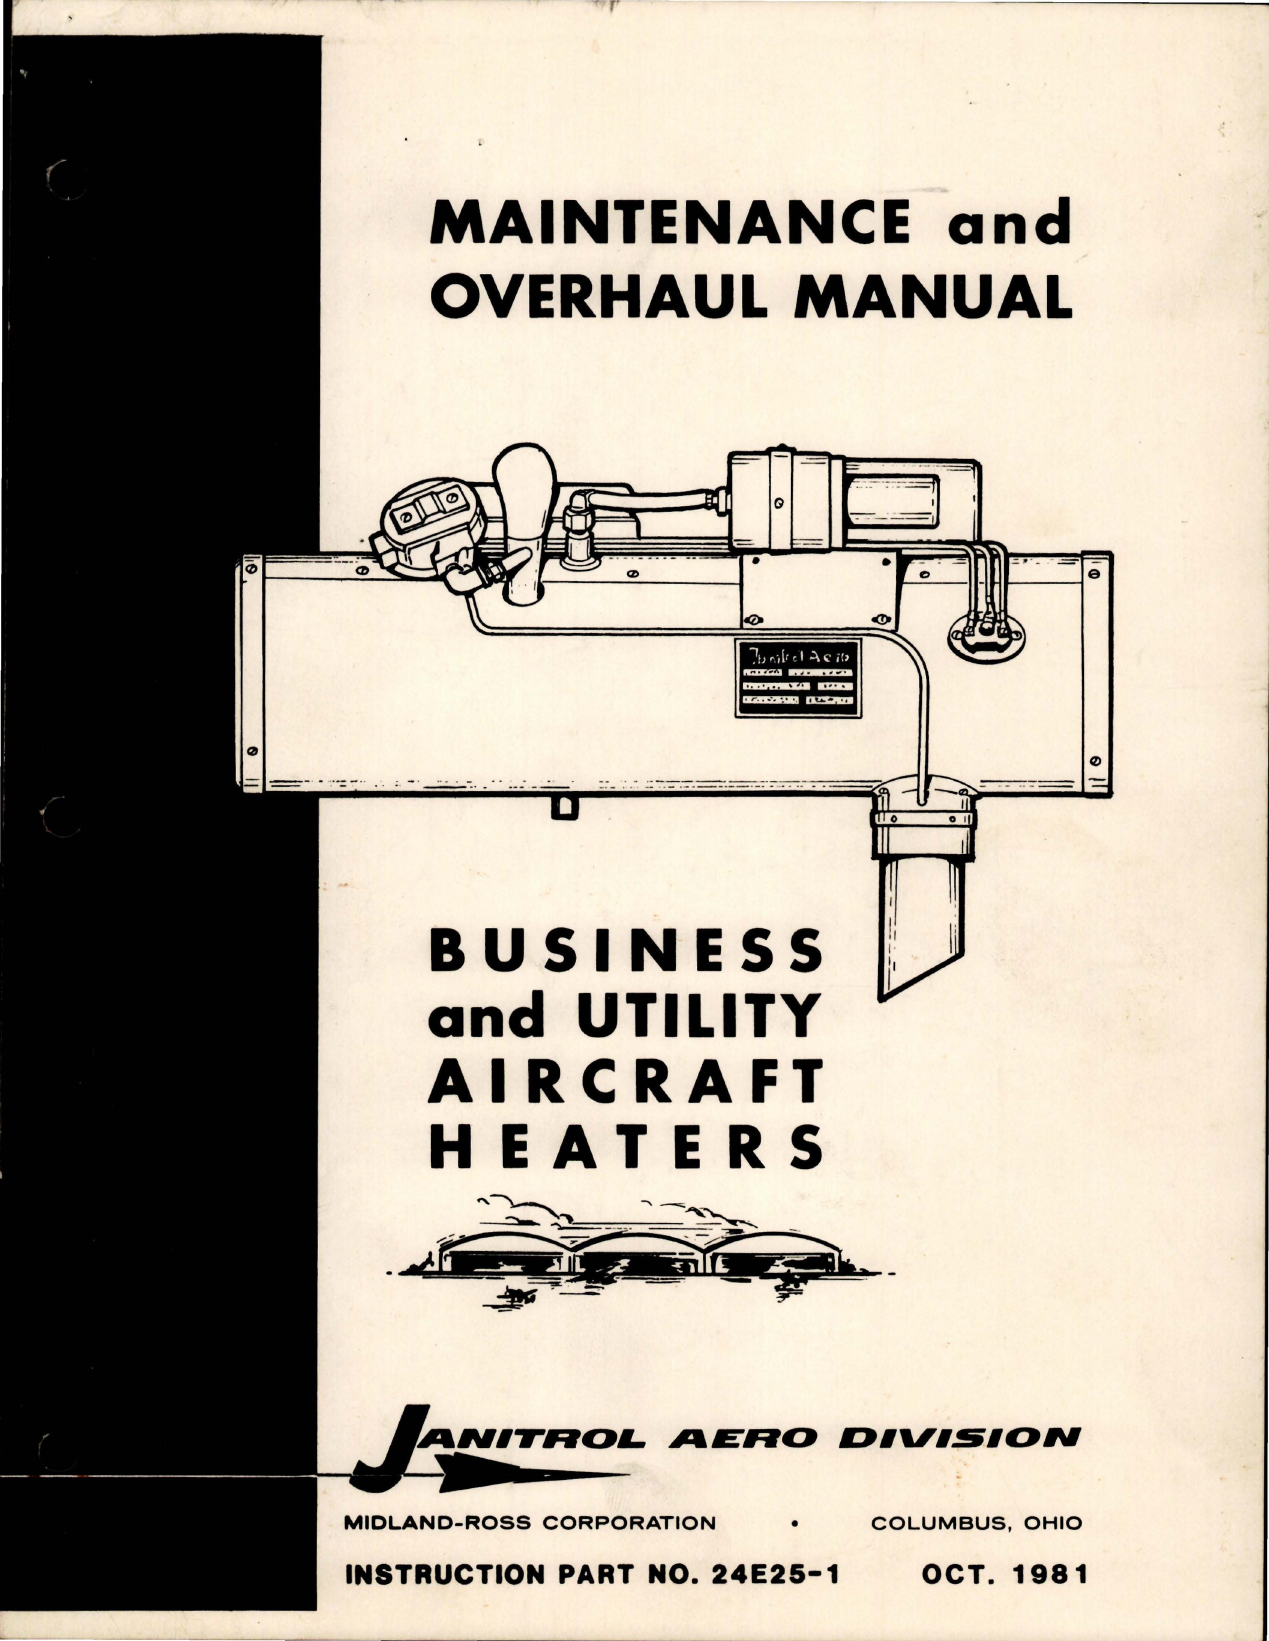 Sample page 1 from AirCorps Library document: Maintenance and Overhaul for Business and Utility Aircraft Heaters 